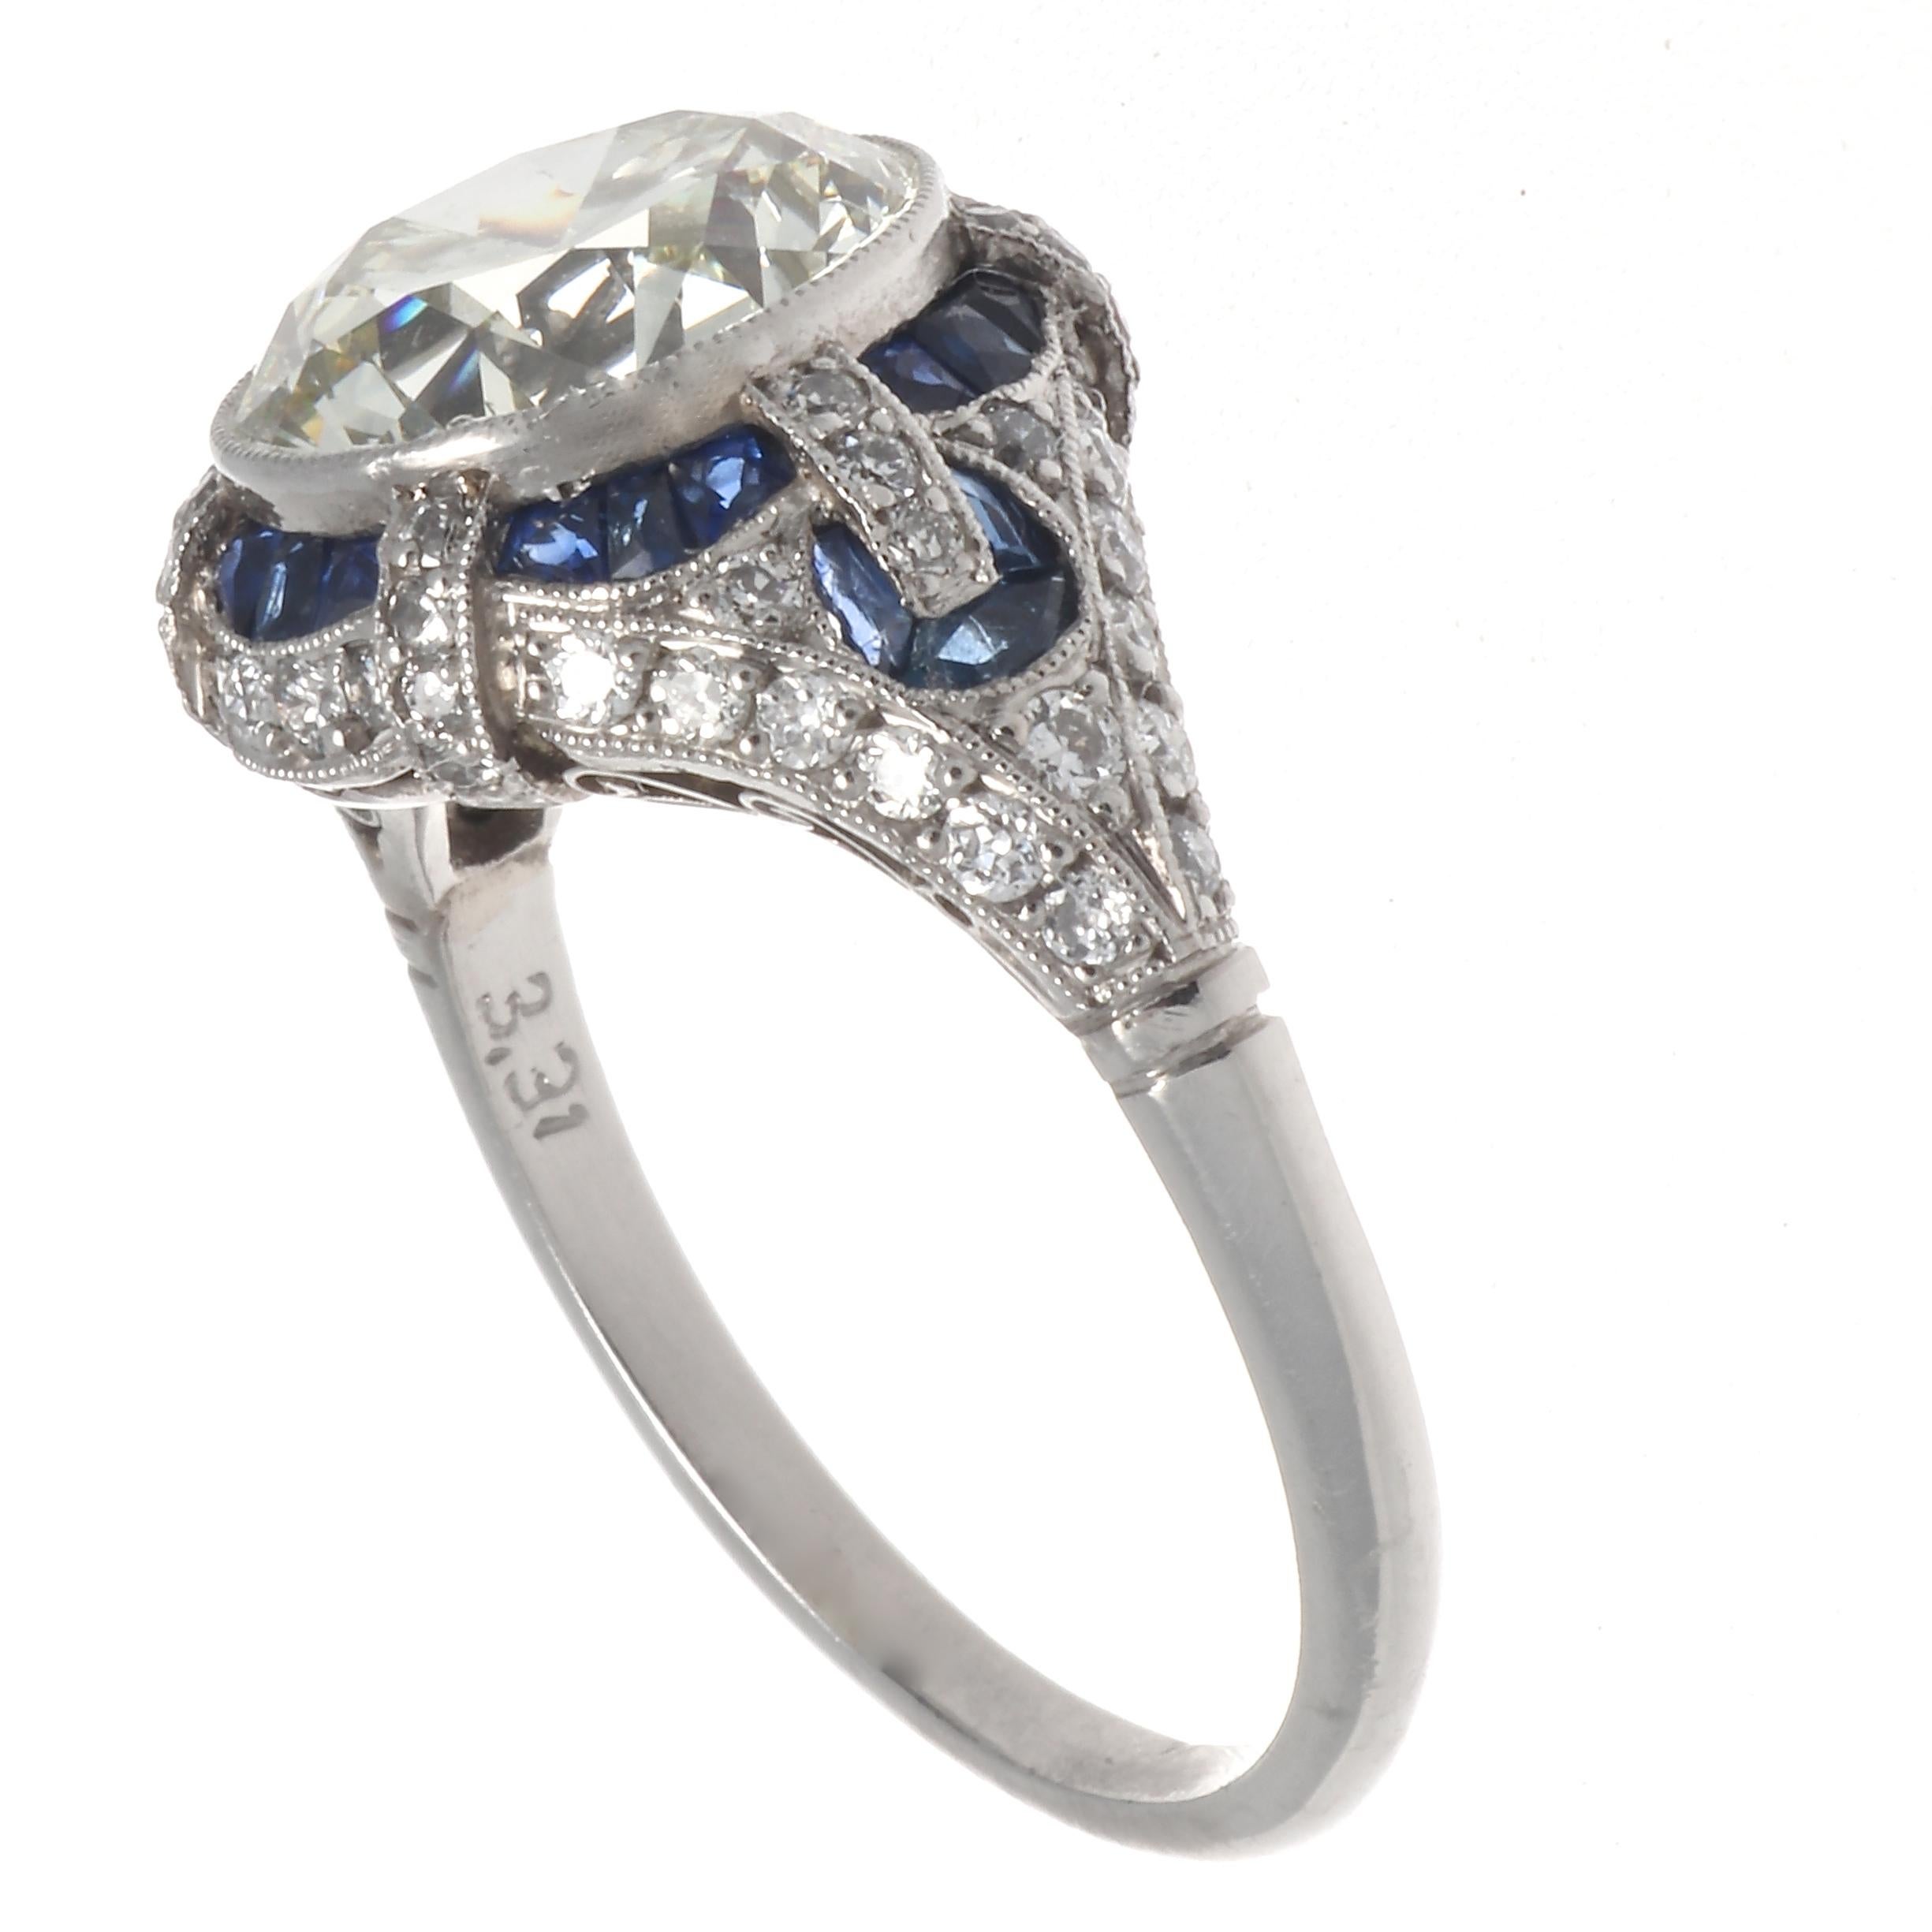 An Art Deco inspired diamond sapphire platinum engagement ring displaying symmetry, style and elegance. Featuring a 3.31 carat old European cut diamond, graded K-L color, VVS clarity. With 24 French cut sapphires that weigh approximately 1.00 carat,